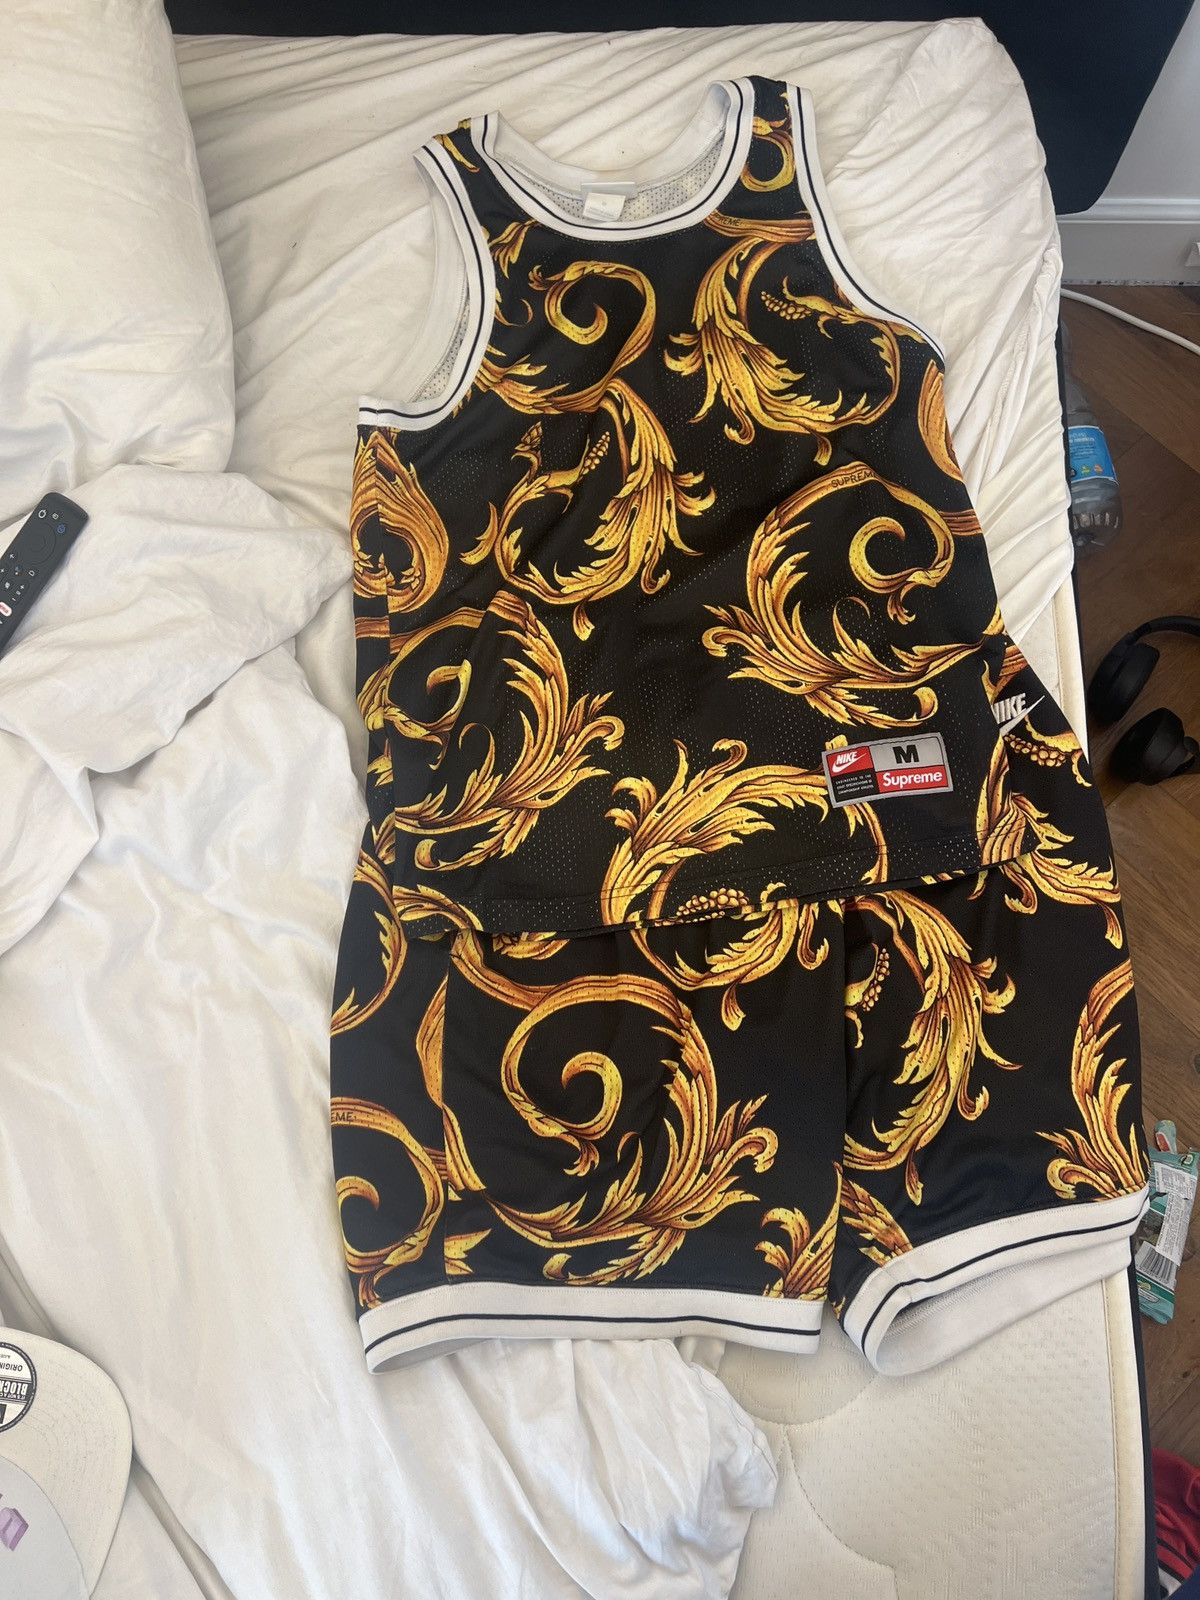 Supreme Supreme Nike jersey and shorts size M | Grailed